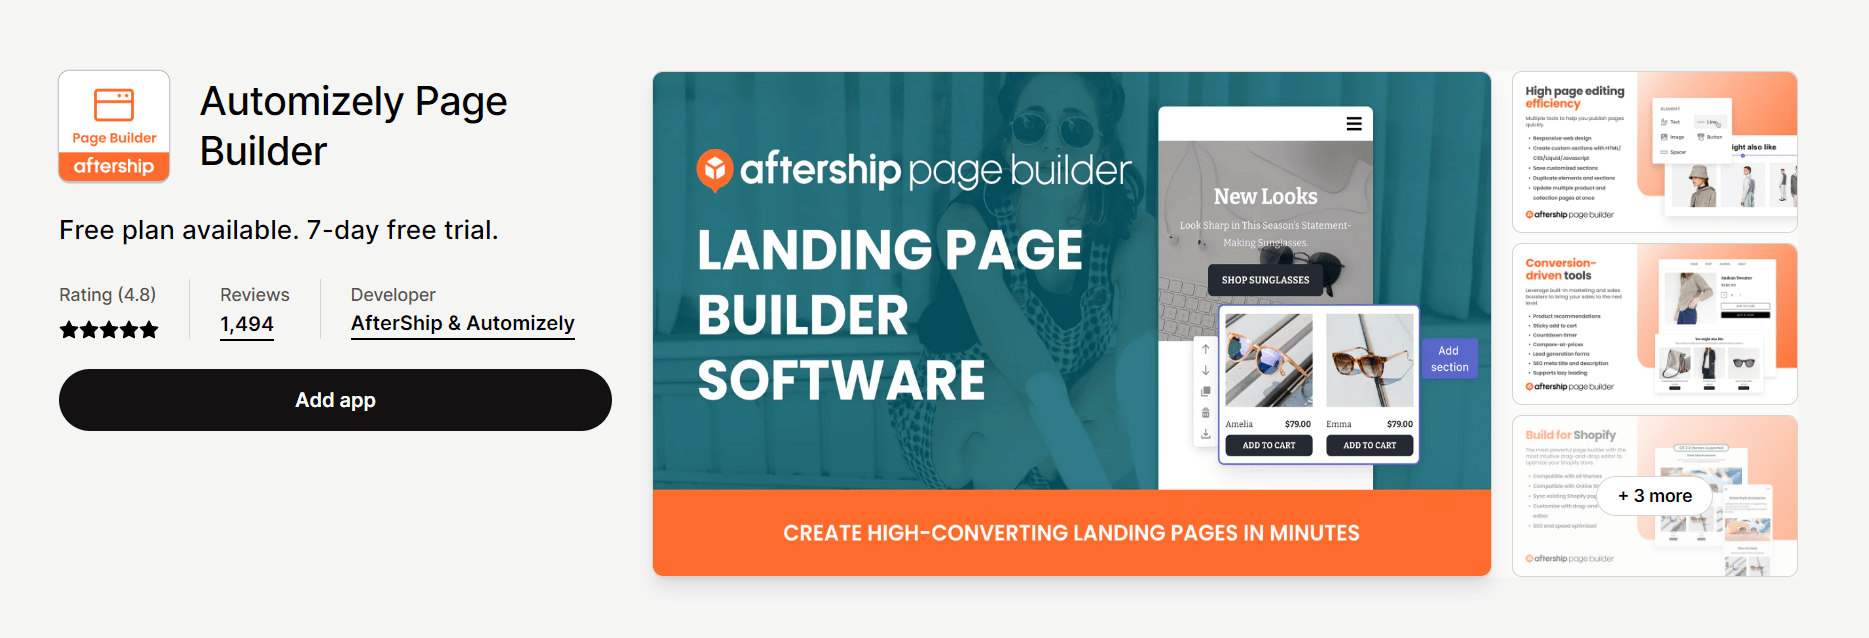 Automizely landing shopify landing page app